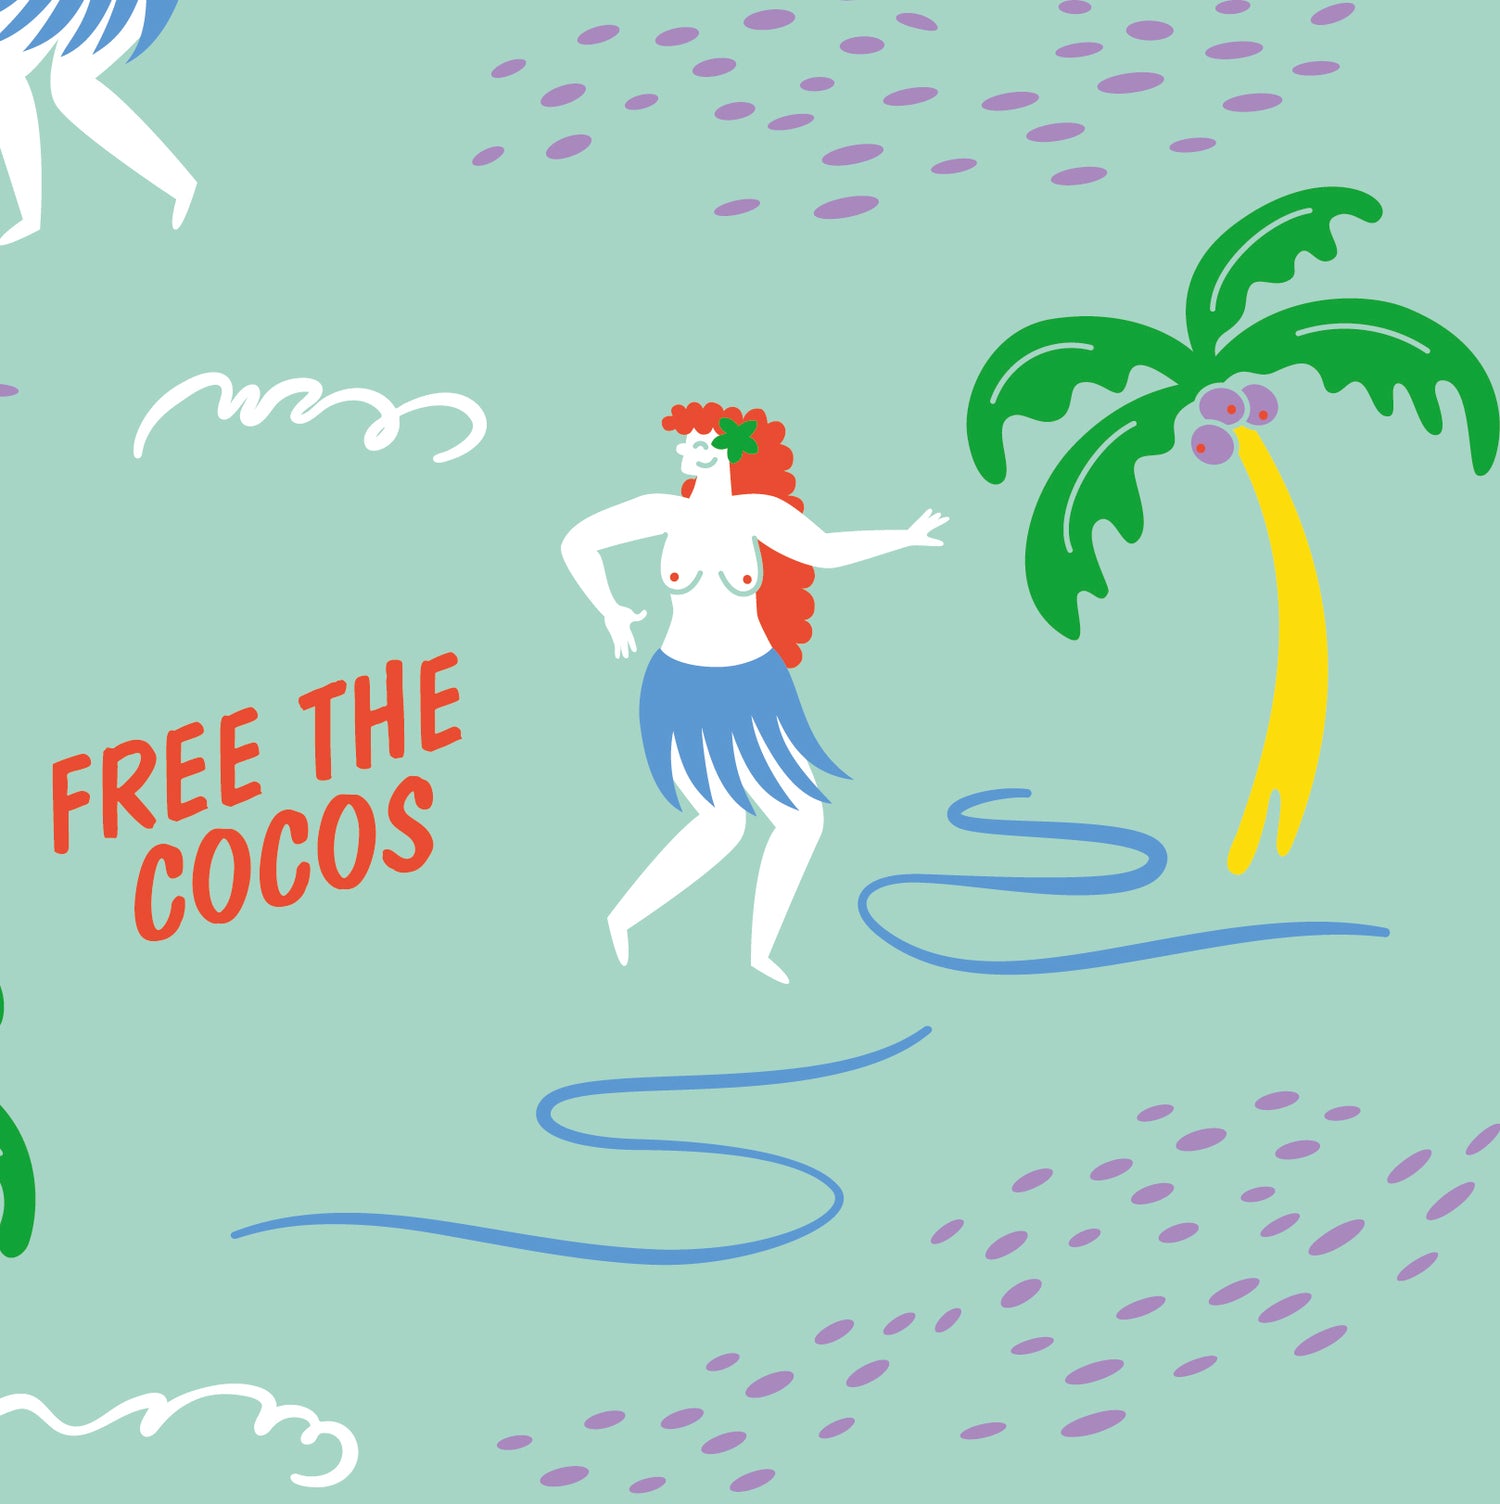 Free the cocos